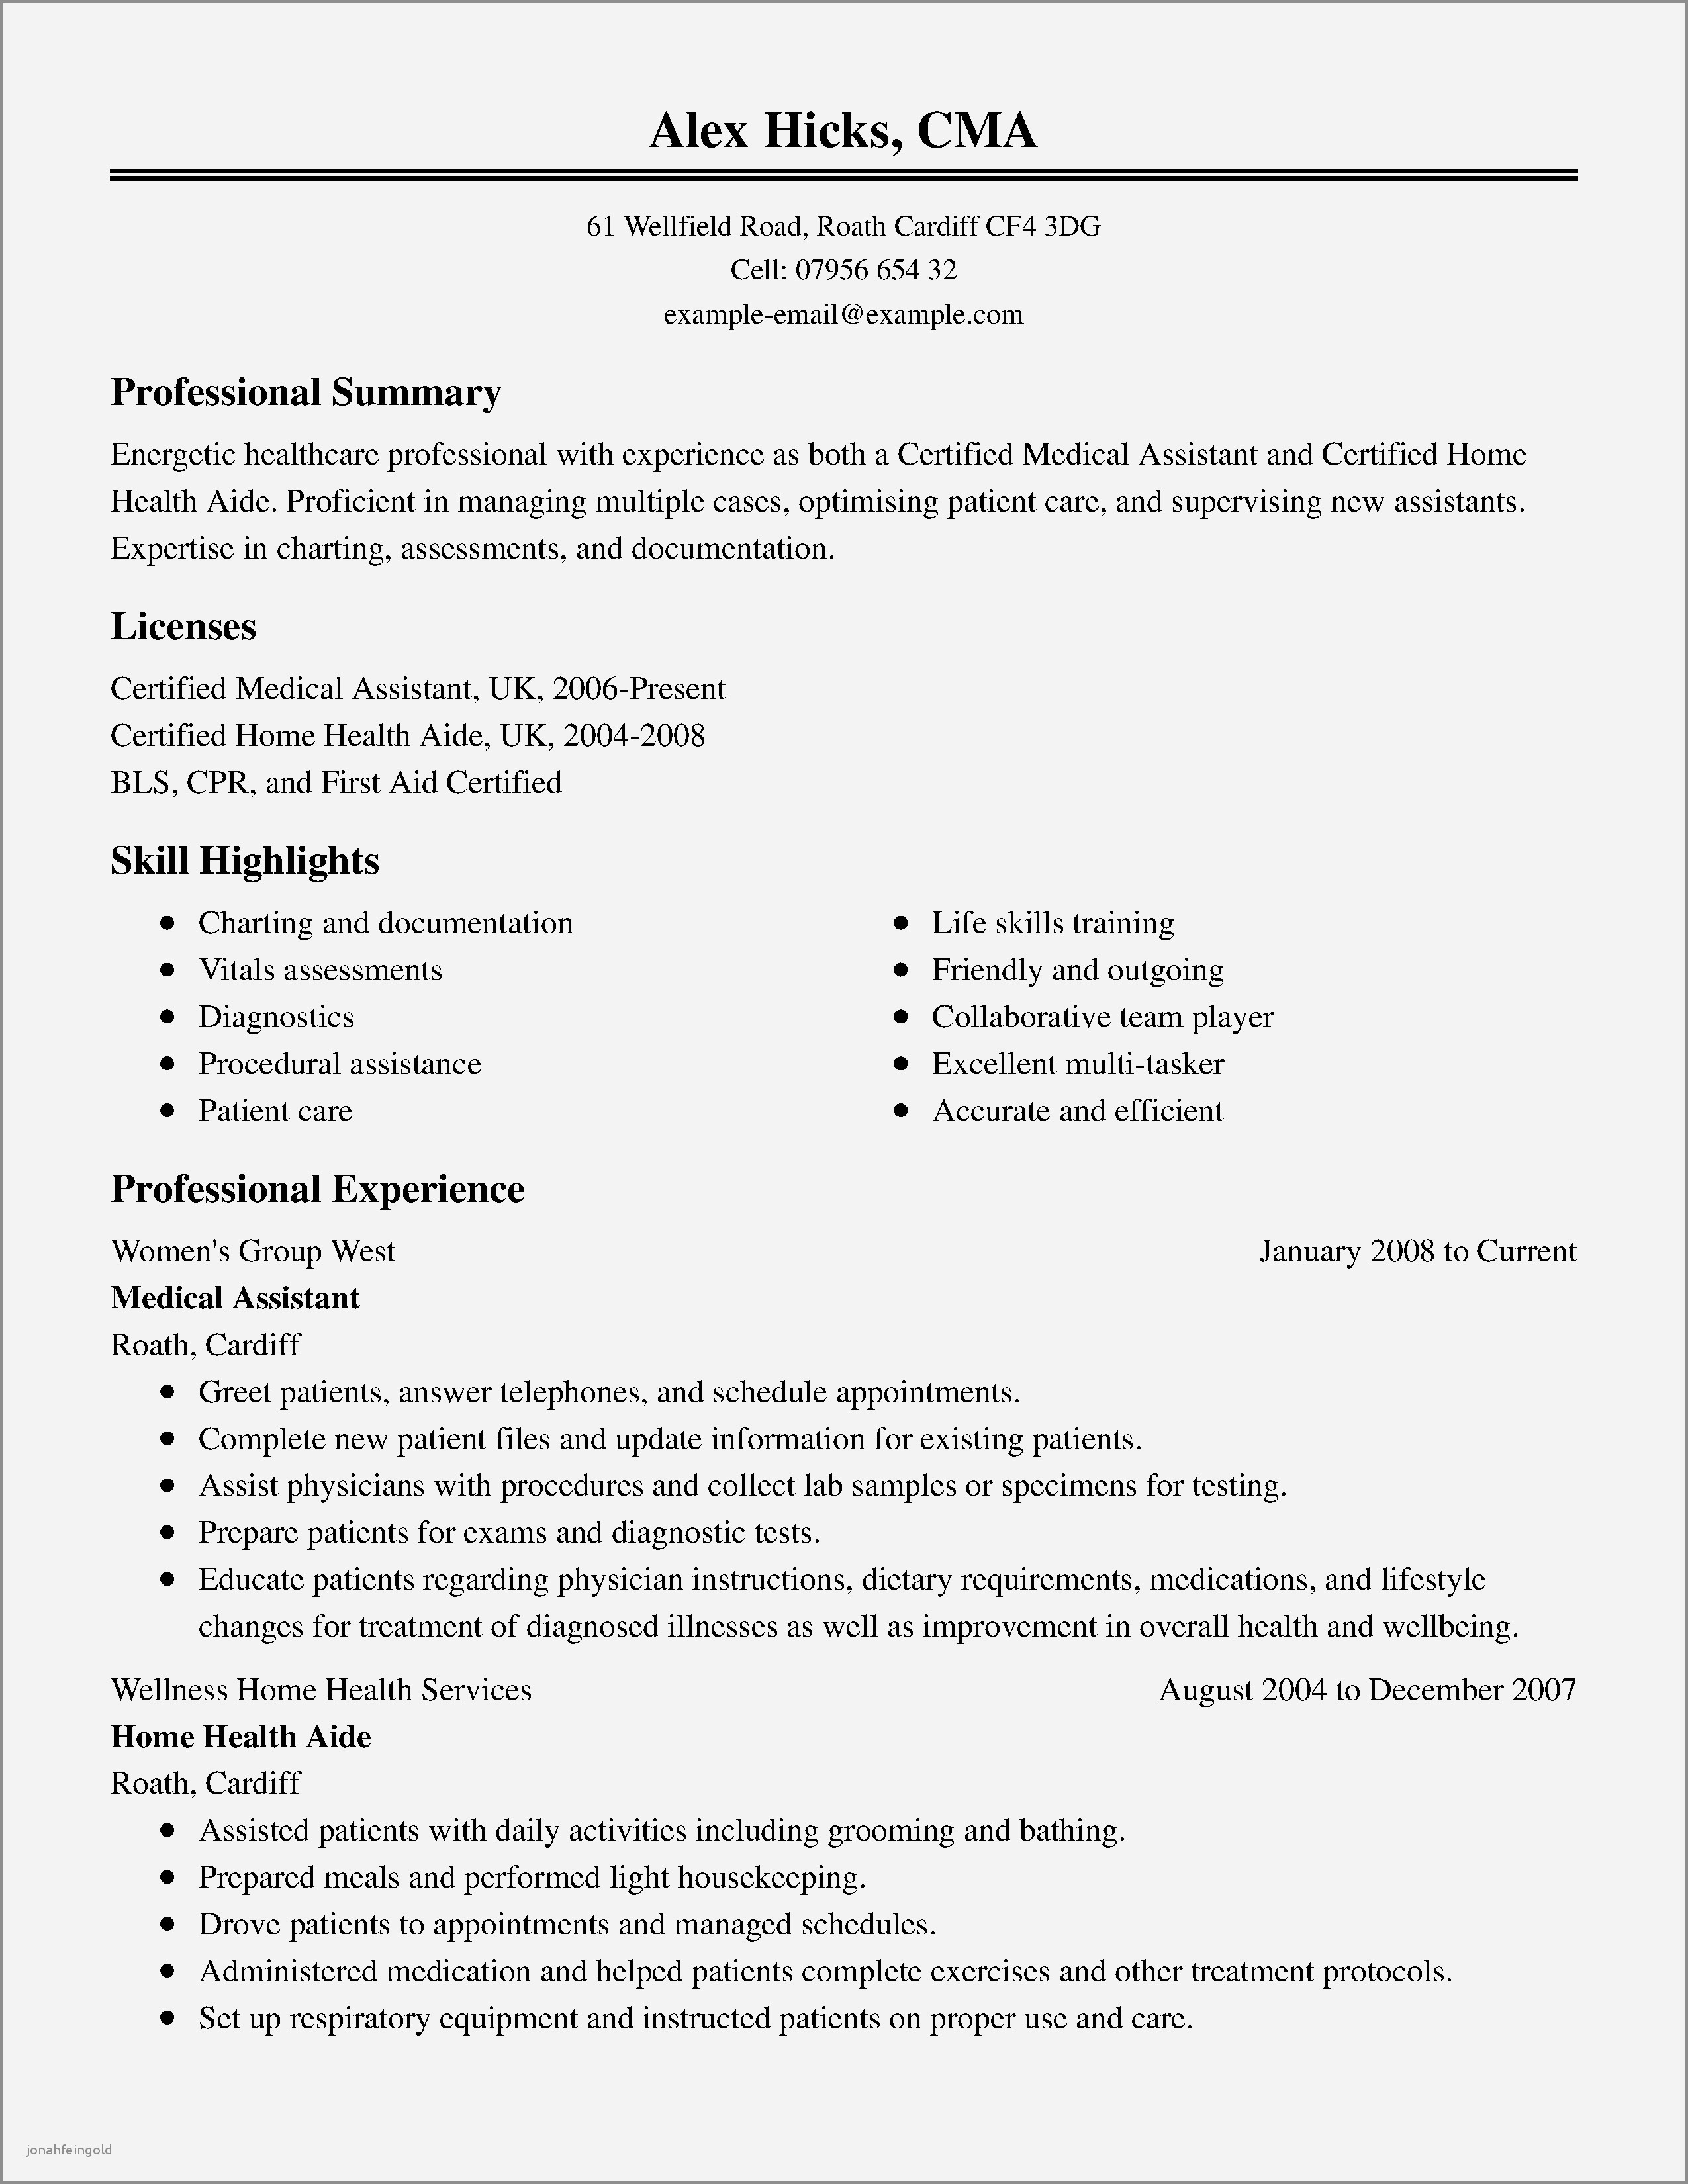 Customer Service Resume Examples Summary Of Qualificationses Resume Executive Assistant Sample For